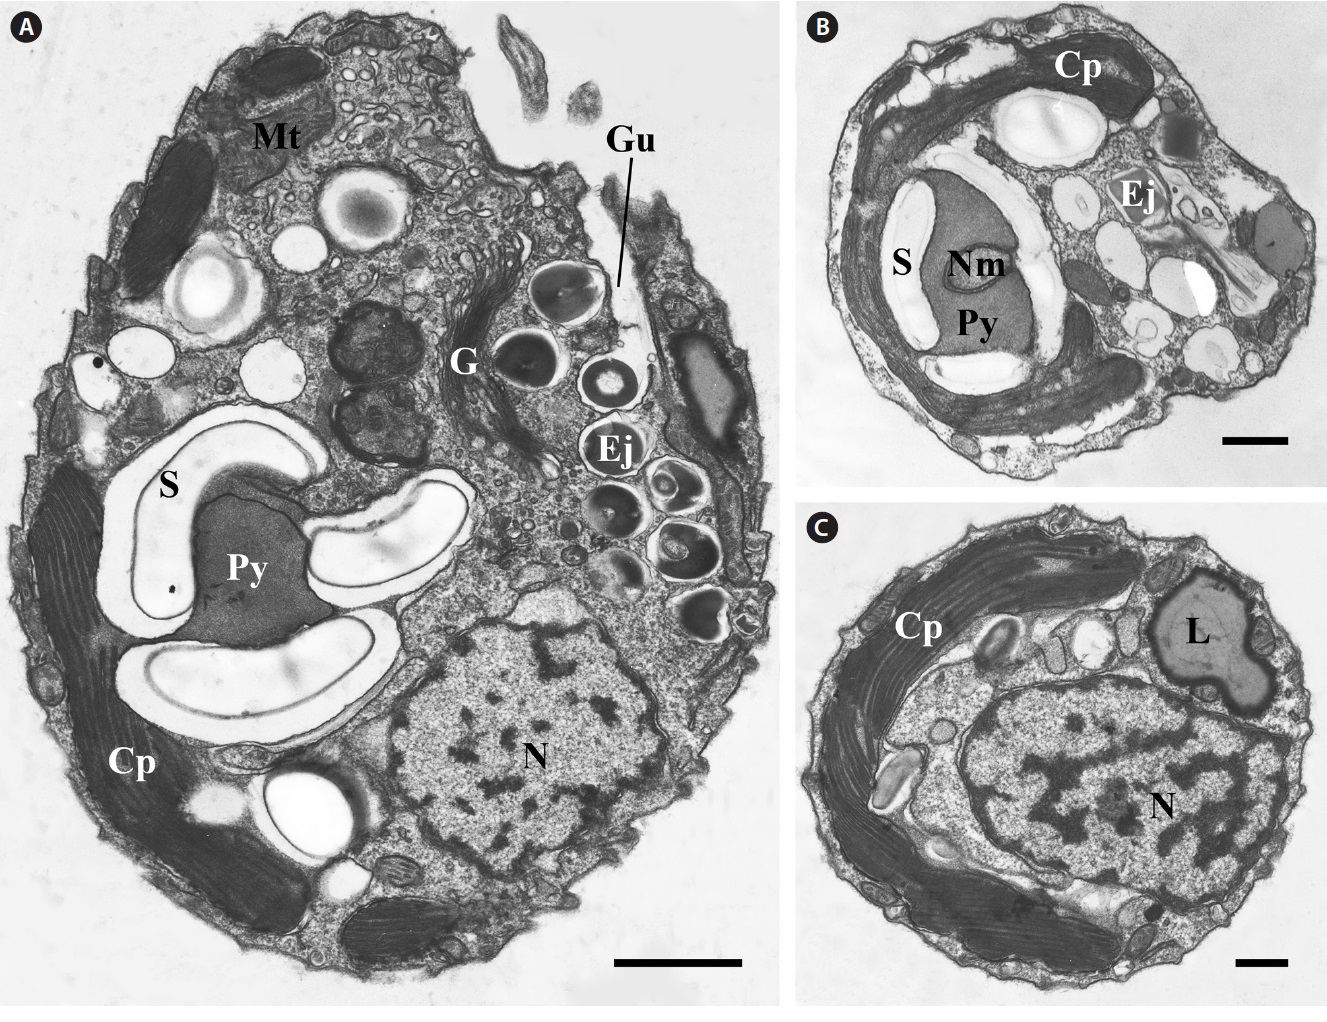 Transmission electron micrographs of general structure. (A) Longitudinal section of Rhinomonas reticulata var. atrorosea showing the
chloroplast (Cp), Golgi body (G), gullet (Gu), nucleus (N), starch (S), pyrenoid (Py), mitochondria (Mt), and ejectosome (Ej). (B) Cross section at
the gullet level showing the Cp, Ej, Py, and nucleomorph (Nm). (C) Cross section at the nuclear level showing the Cp and N. L, lipid. Scale bars
represent: A, 1 μm; B & C, 0.5 μm.